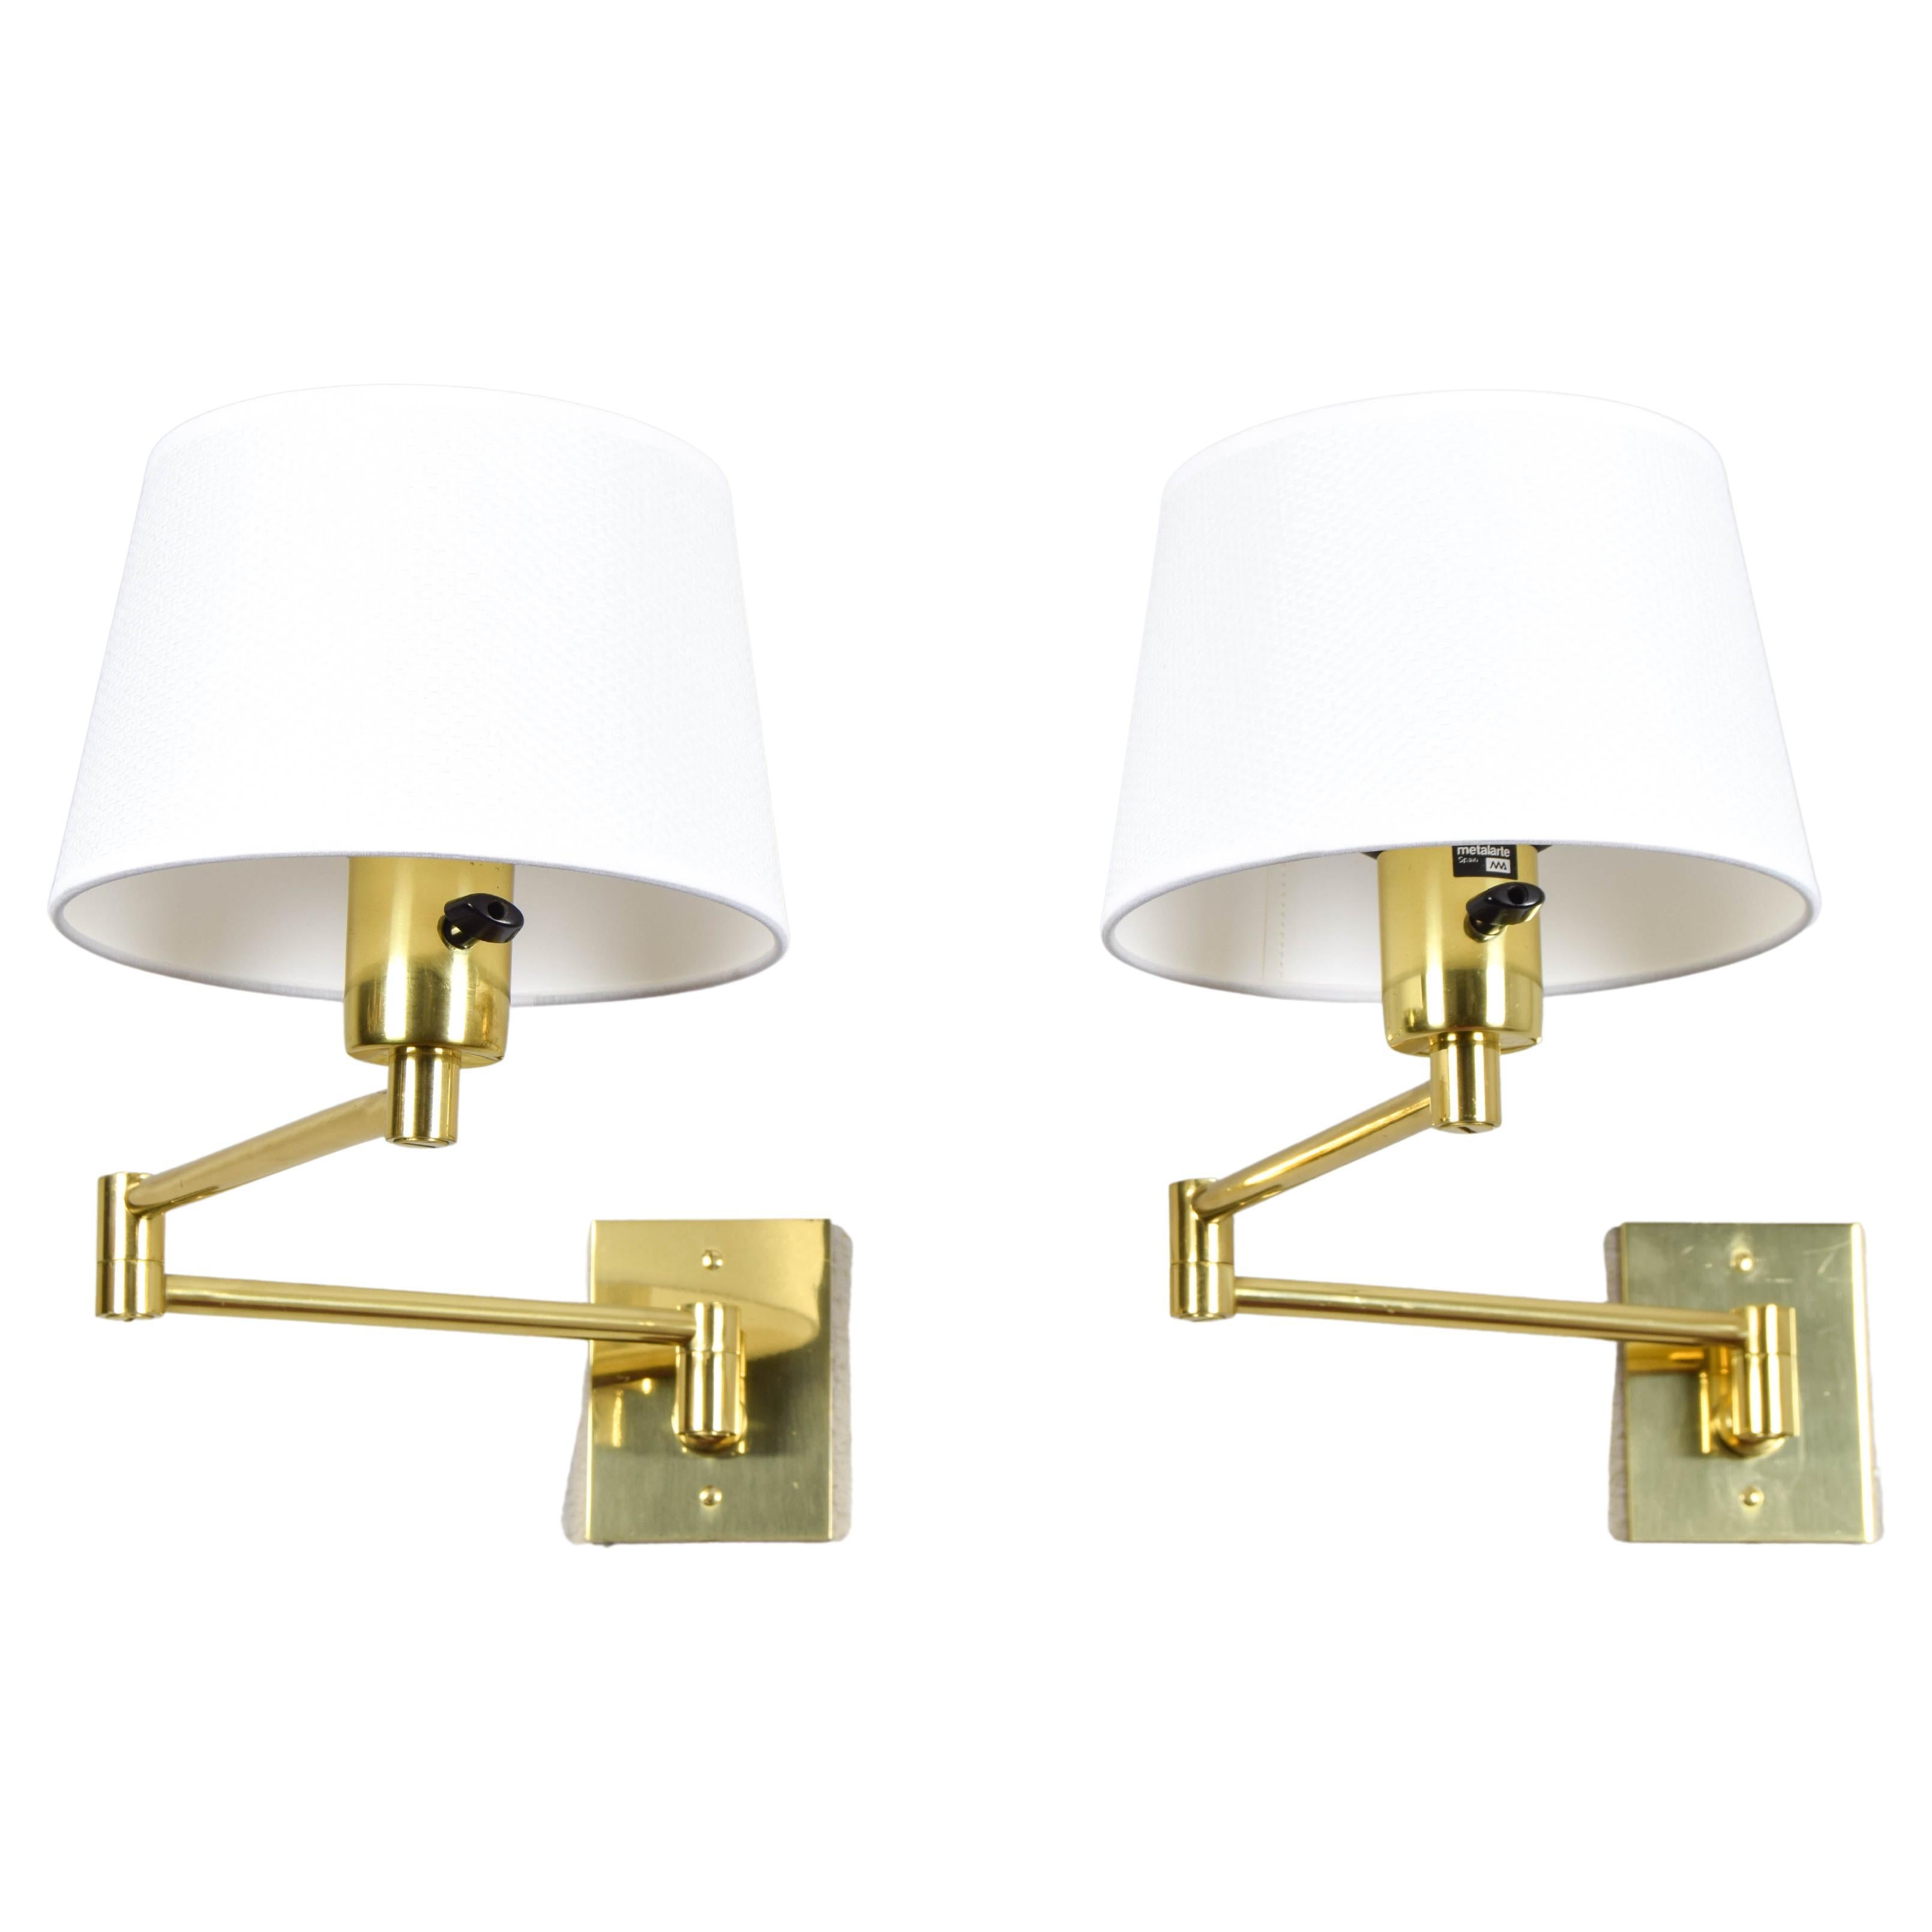  Two Mid-Century Modern Swing Arm Brass Sconces by George W Hansen for Metalarte